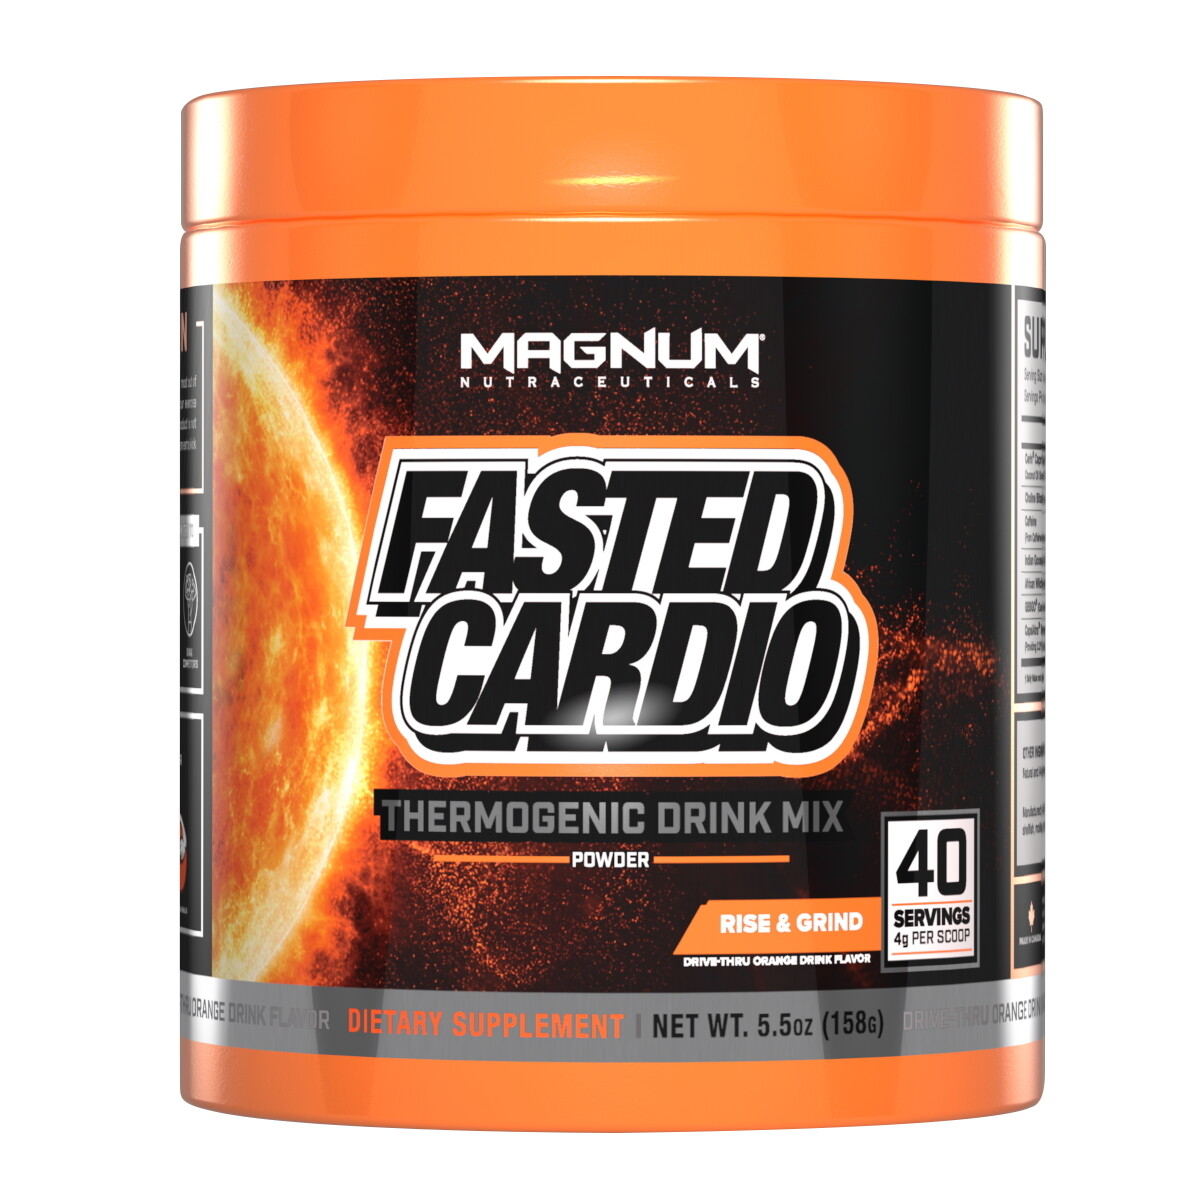 Magnum Fasted Cardio - Rise And Grind